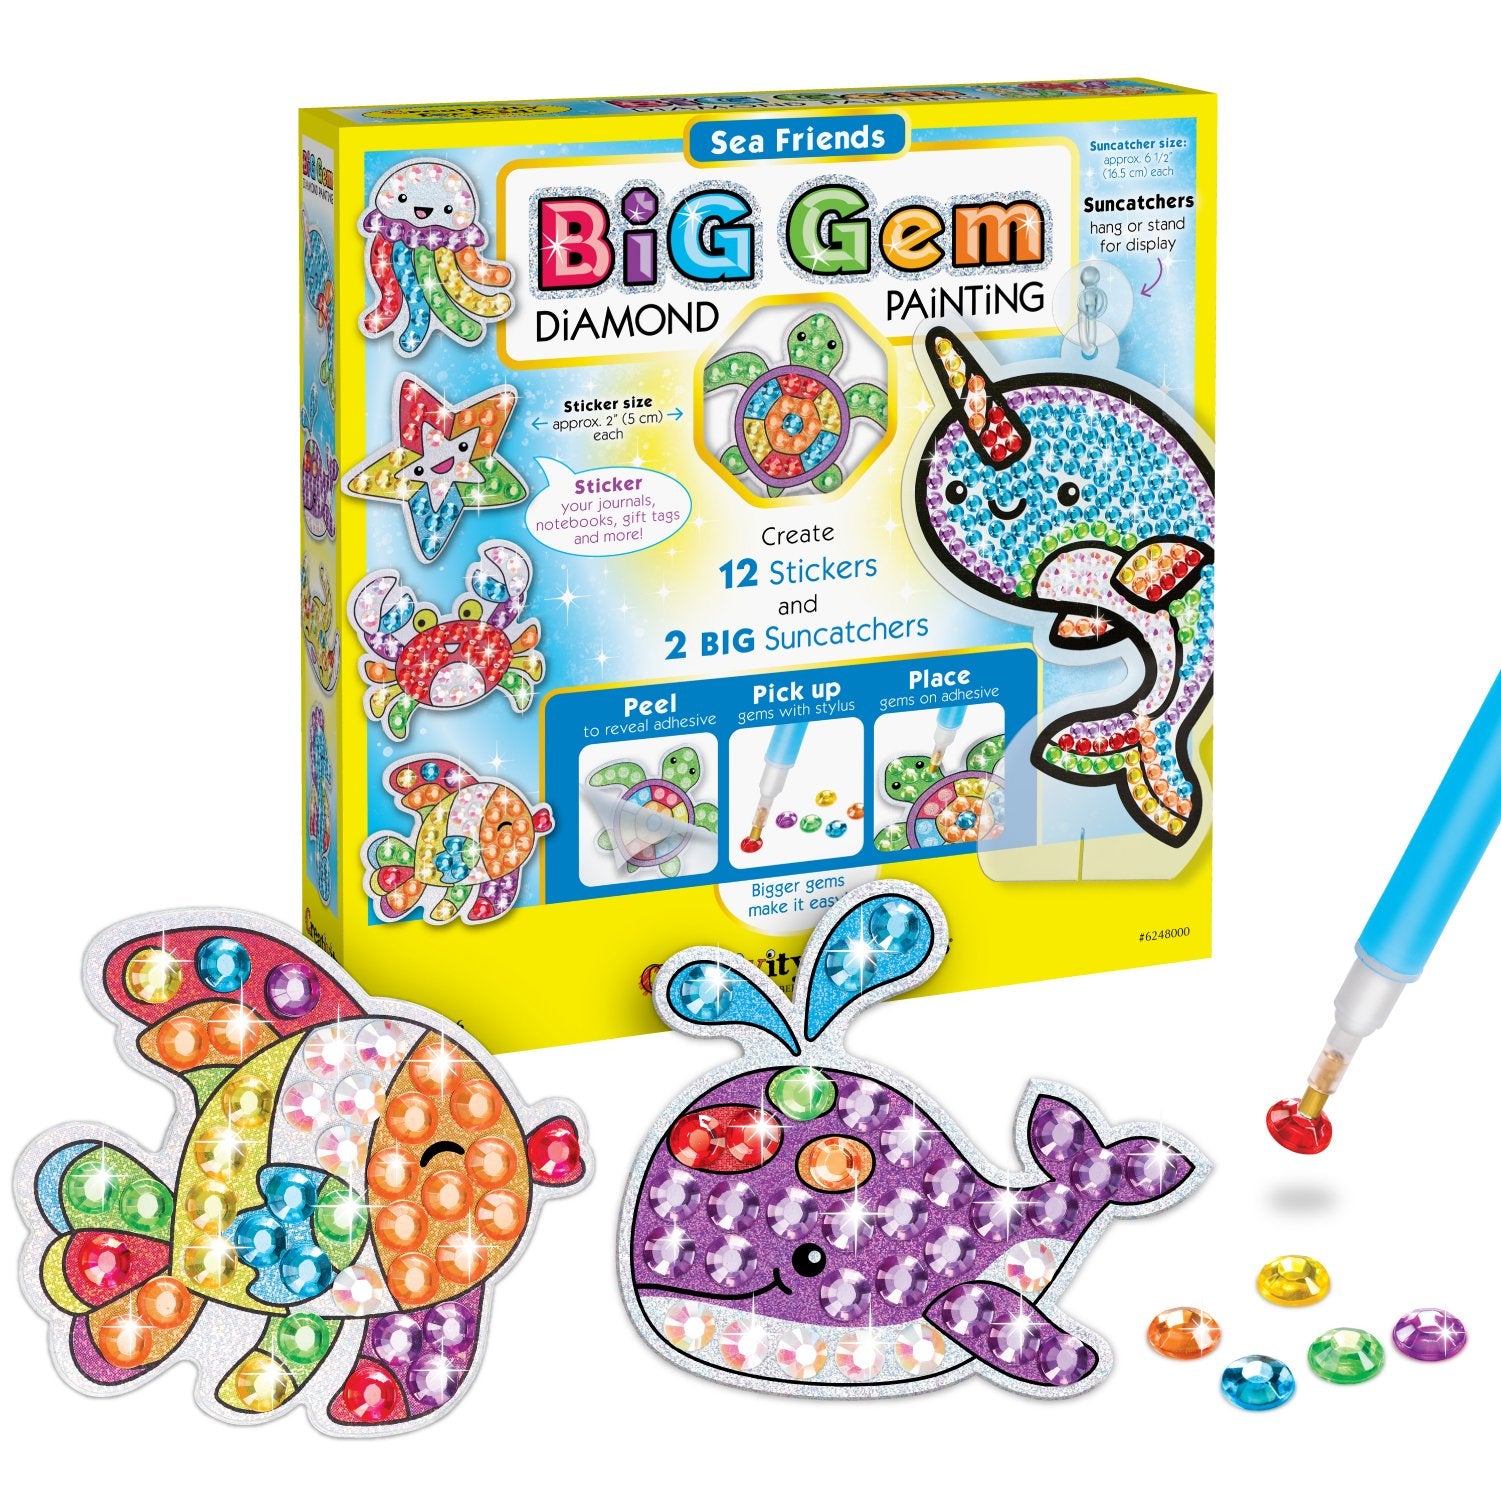  PLASUPPY Gem Art Diamond Painting Kits for Kids Ages 8-12, 24  Pieces DIY Diamond Painting Stickers, 5D Big Gem Suncatchers and Stickers  Kits Create Your Own Magical Art Gift for Girls 